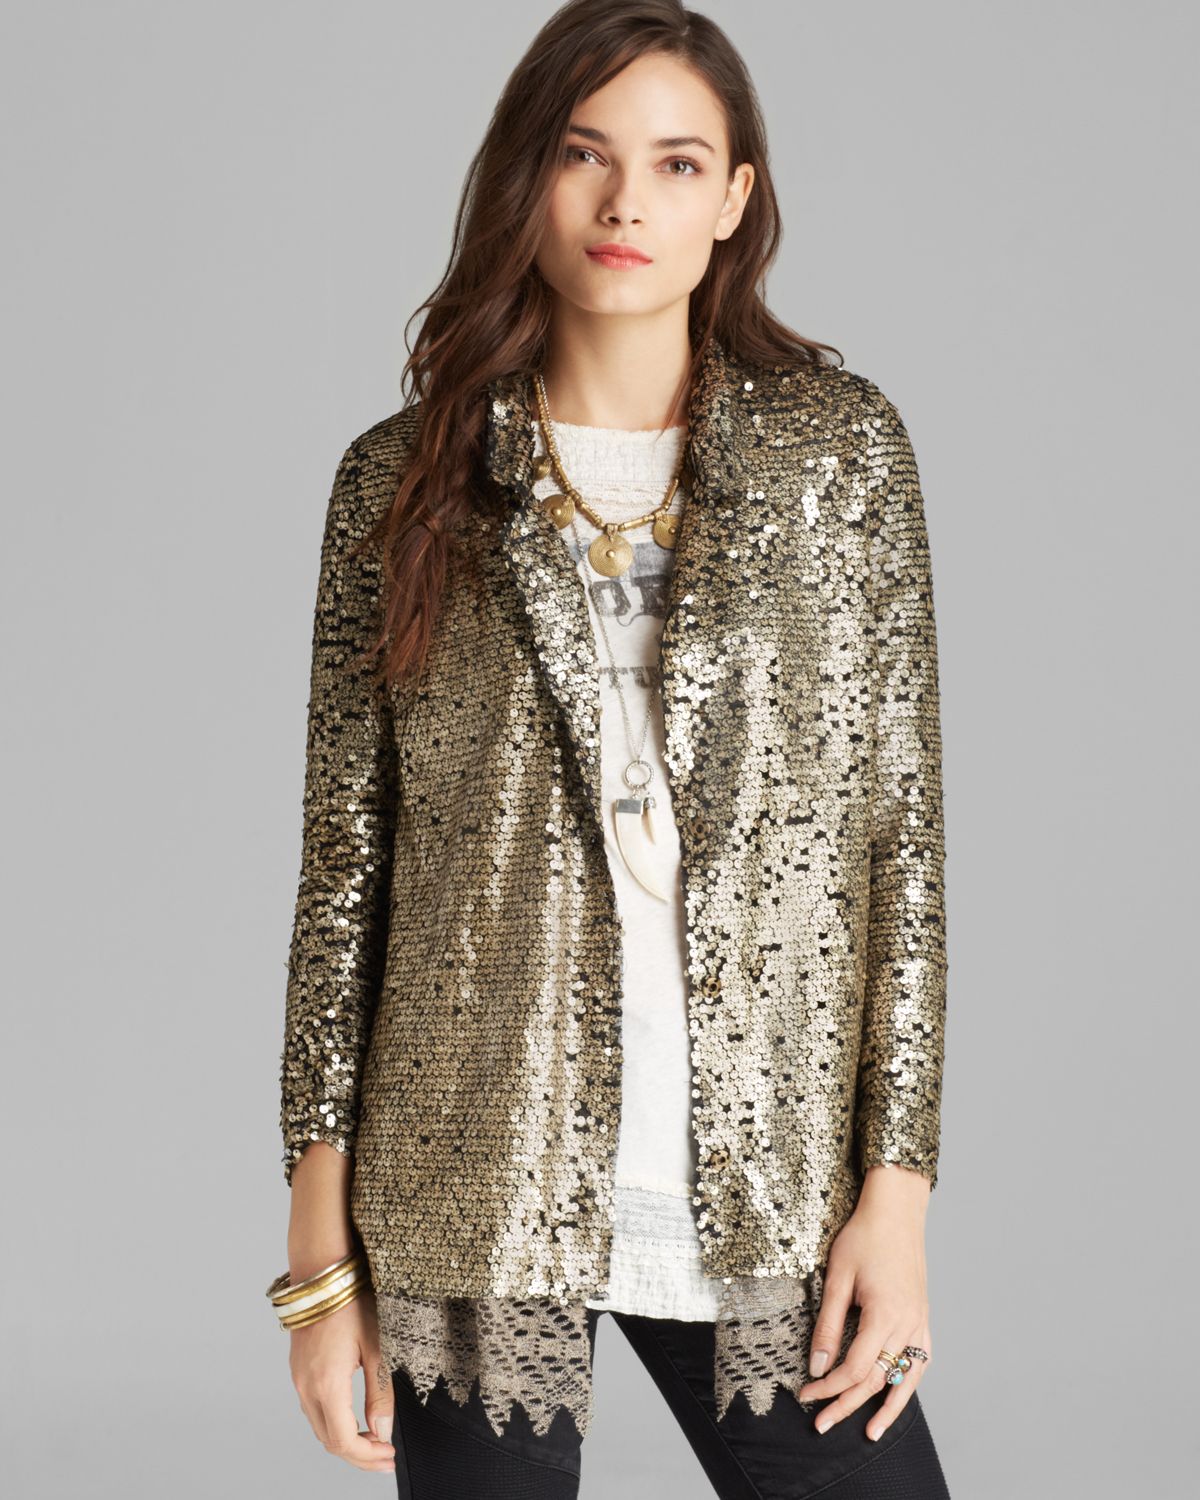 Lyst - Free people Jacket Tarnished Sequin Stardust in Gray